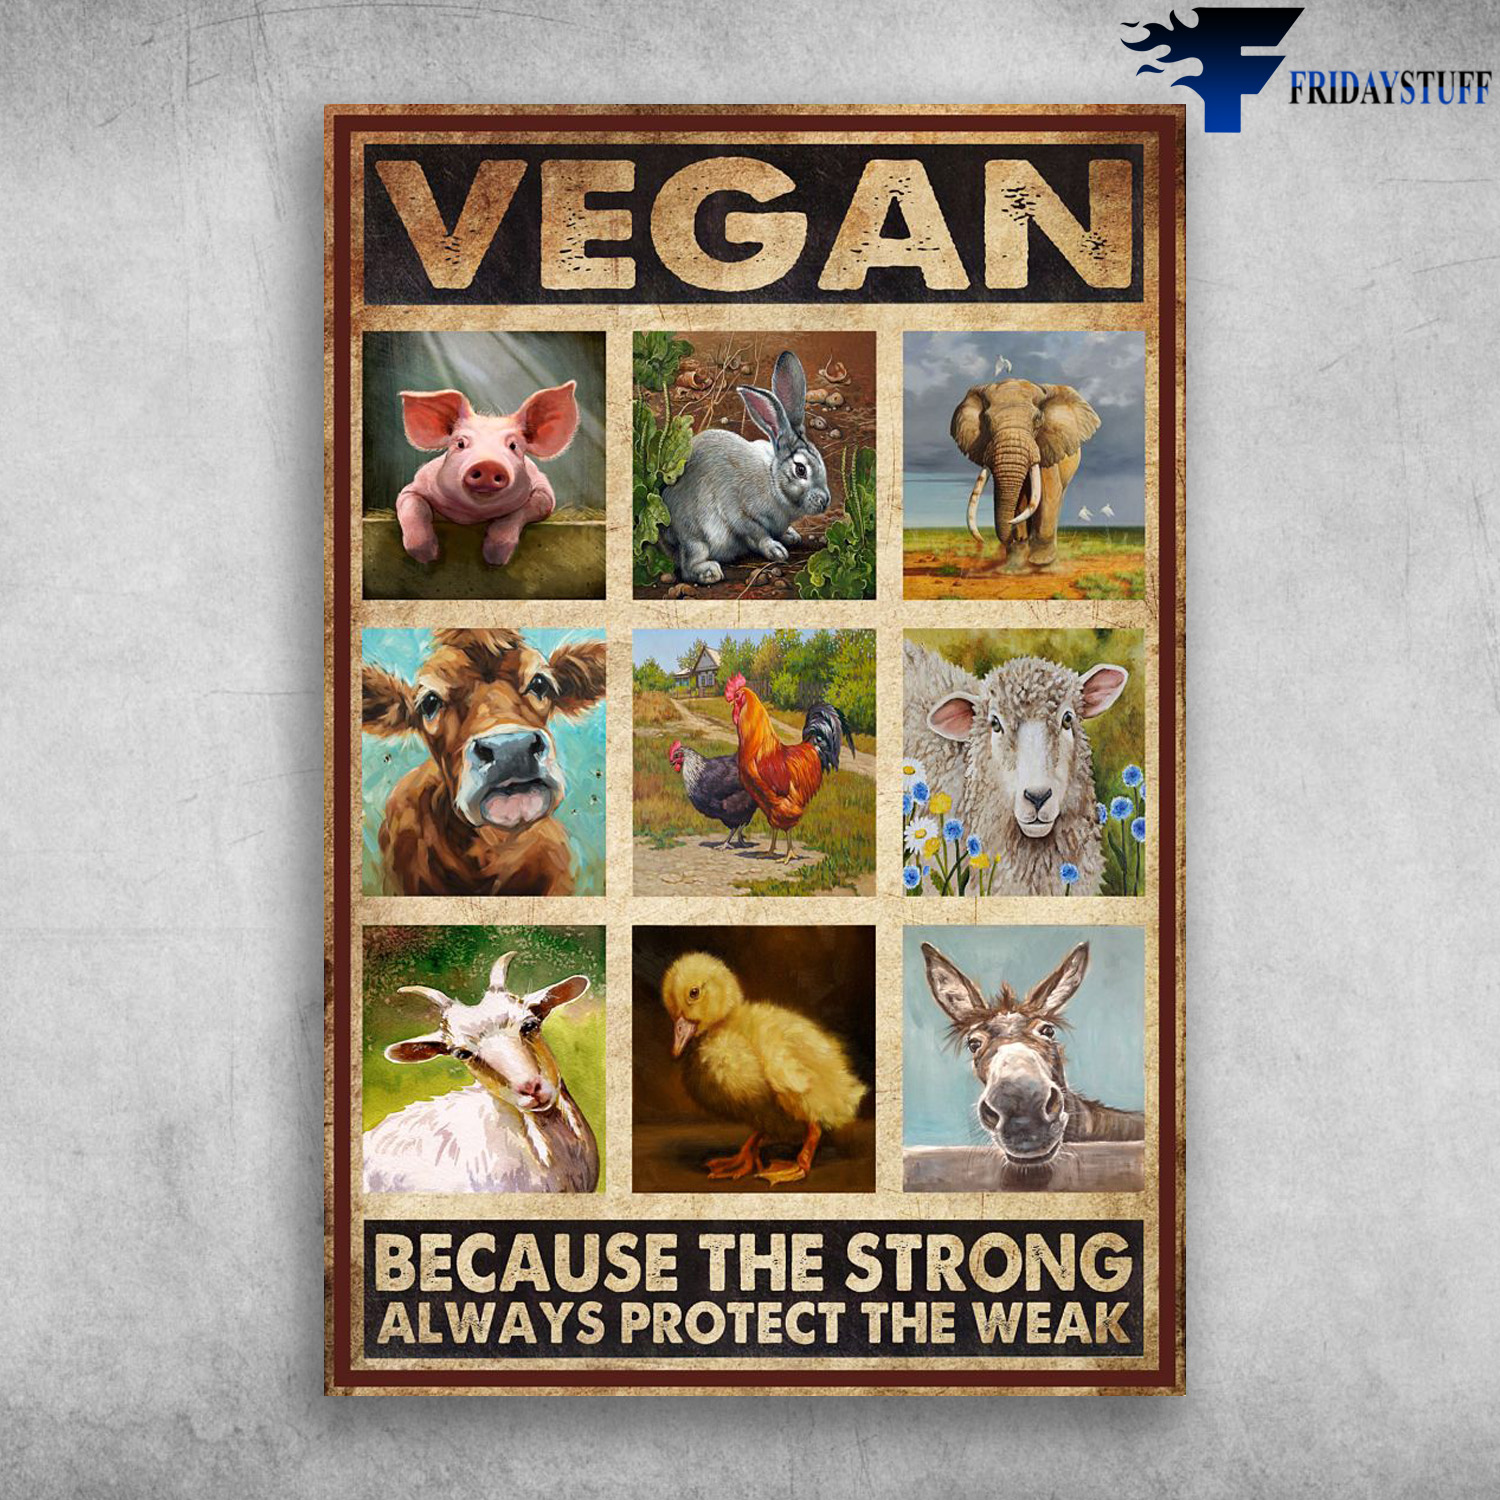 Vegan - Because The Strong Always Protect The Weak, Pig, Rabbit, Elephant, Cow, Chicken, Sheep, Goat, Duck, Donkey